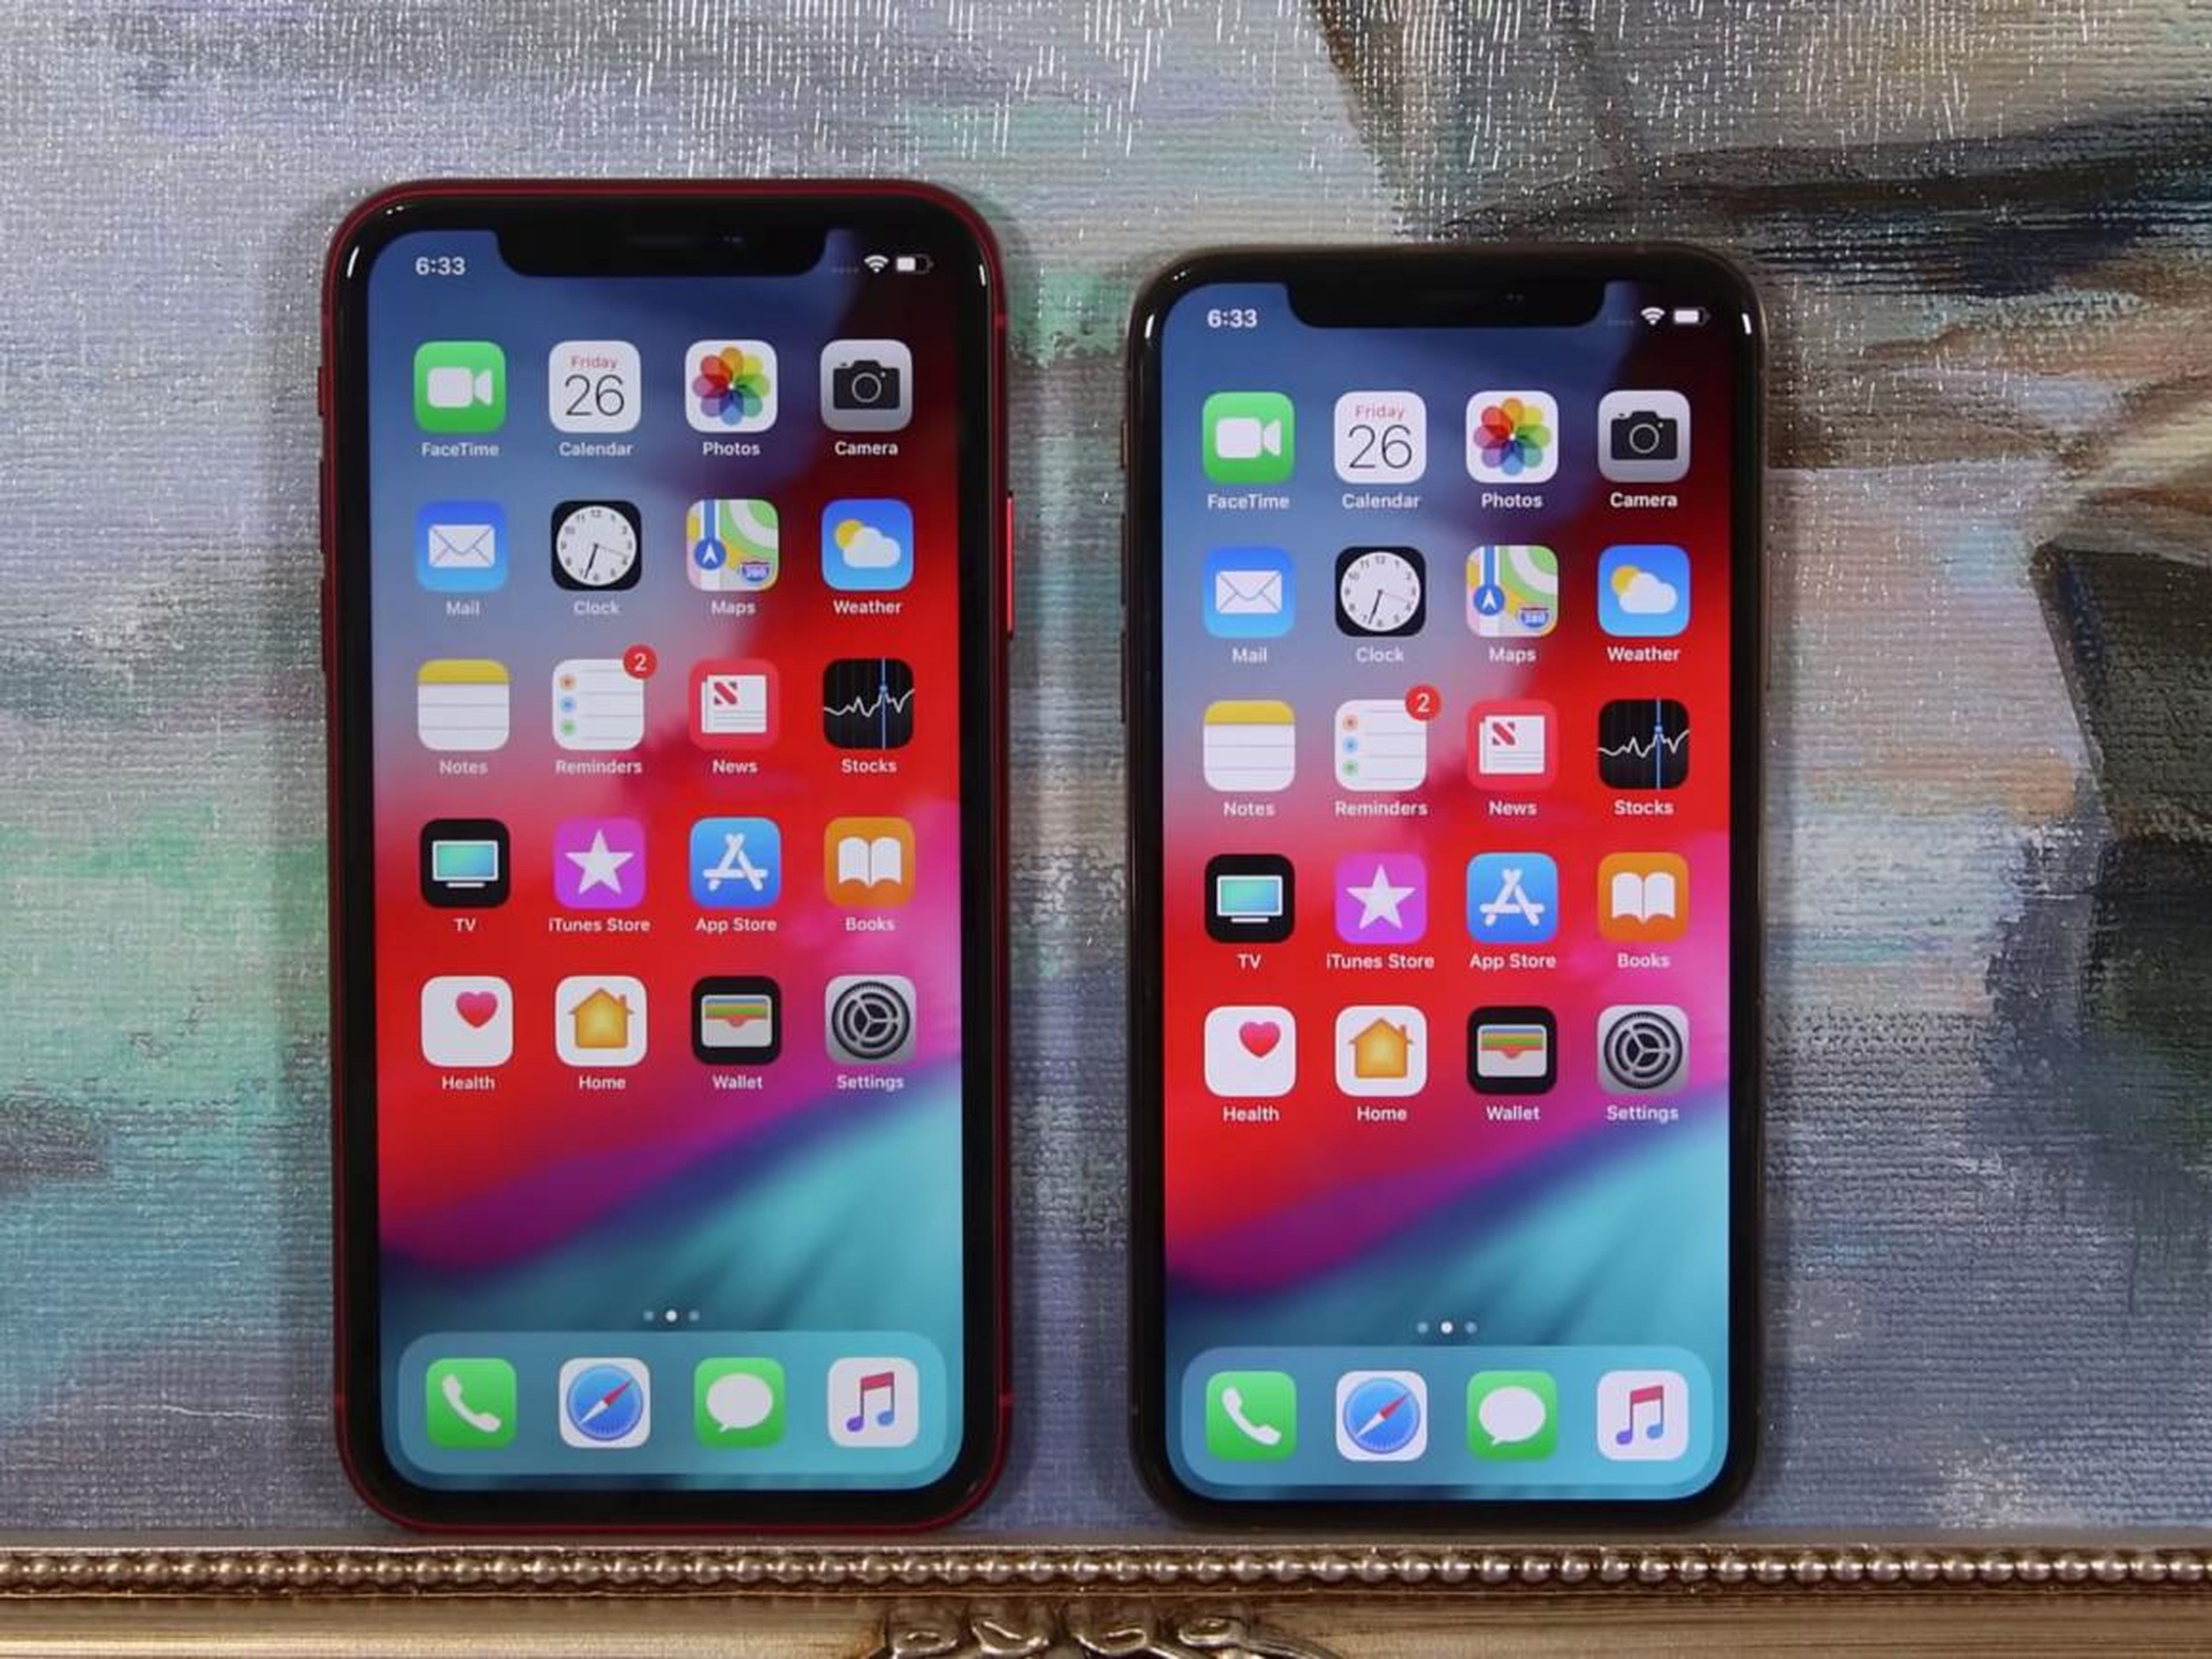 The 6.1-inch iPhone XR has a slightly bigger screen than the 5.8-inch iPhone XS.